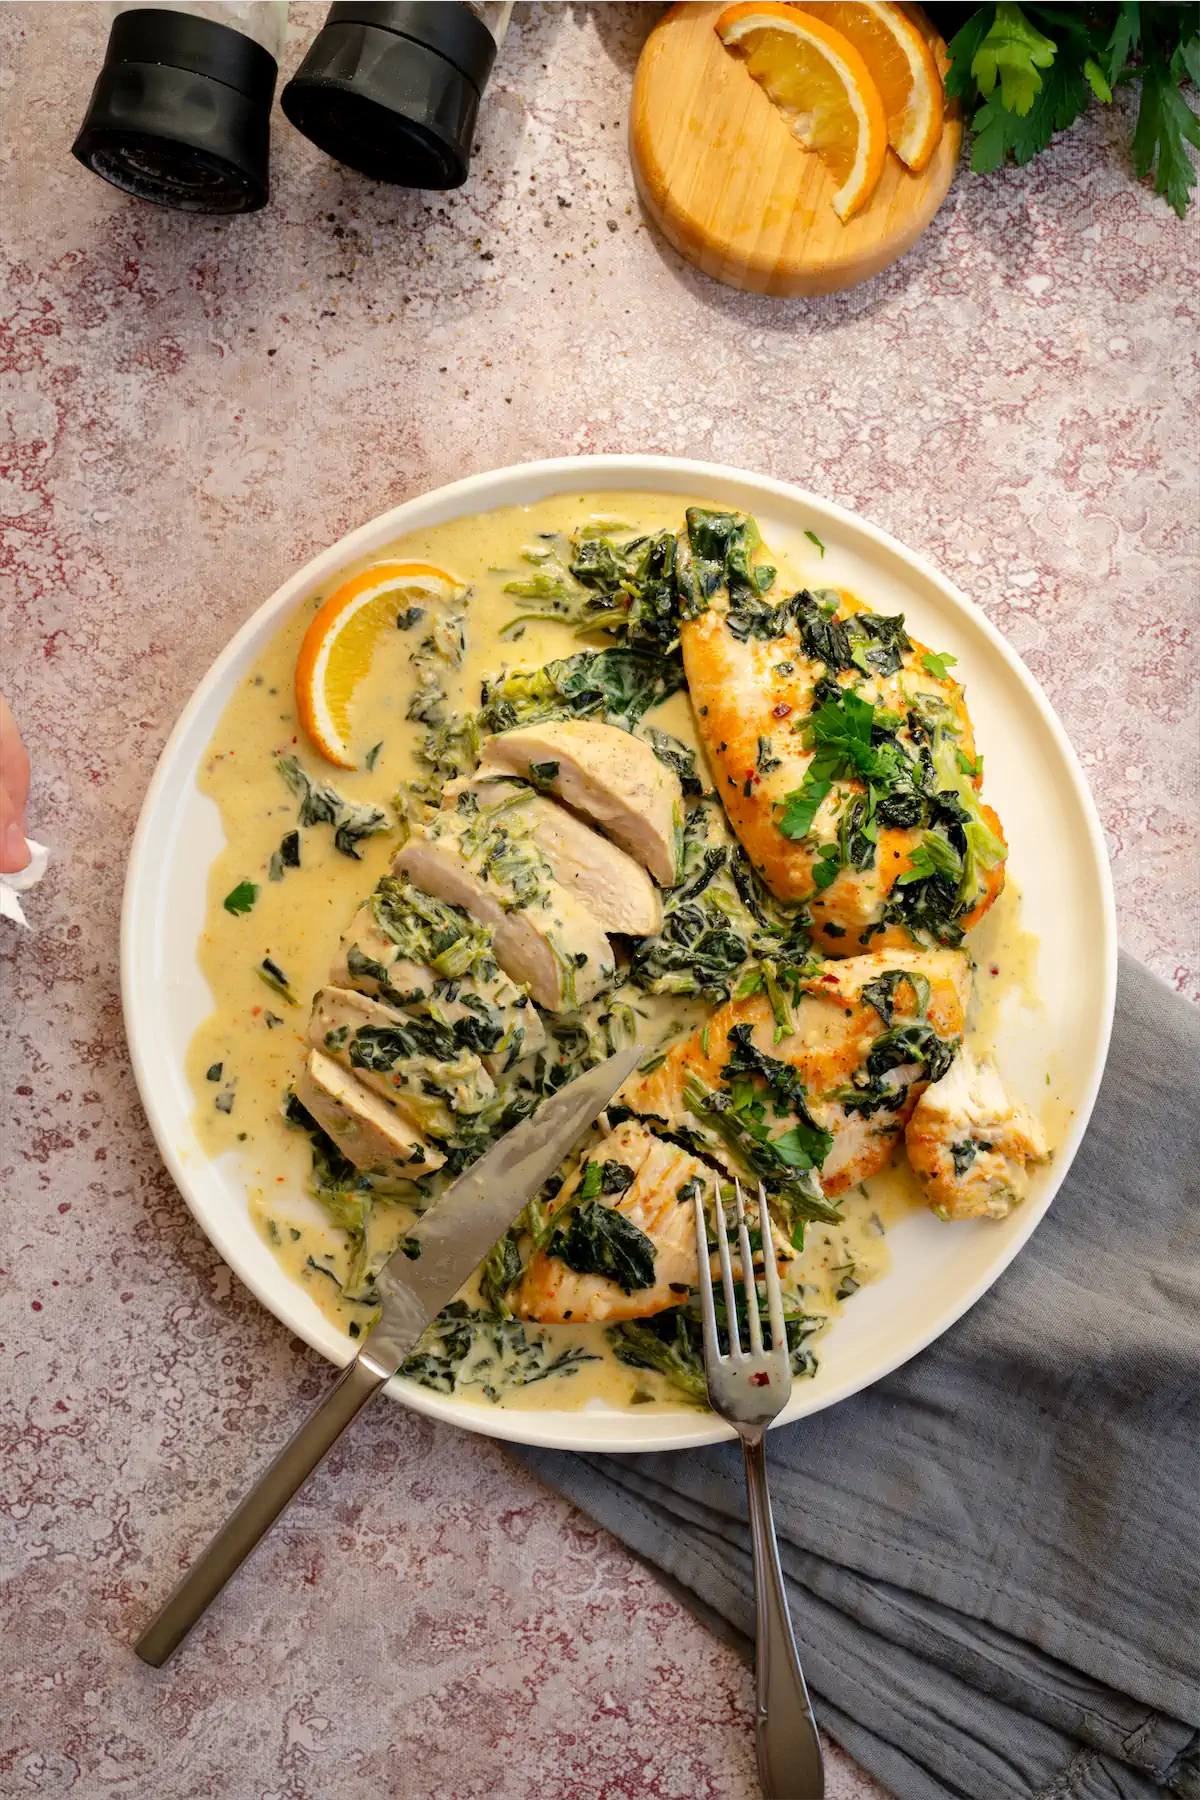 A plate featuring chicken Florentine with some filets sliced by knife and fork.